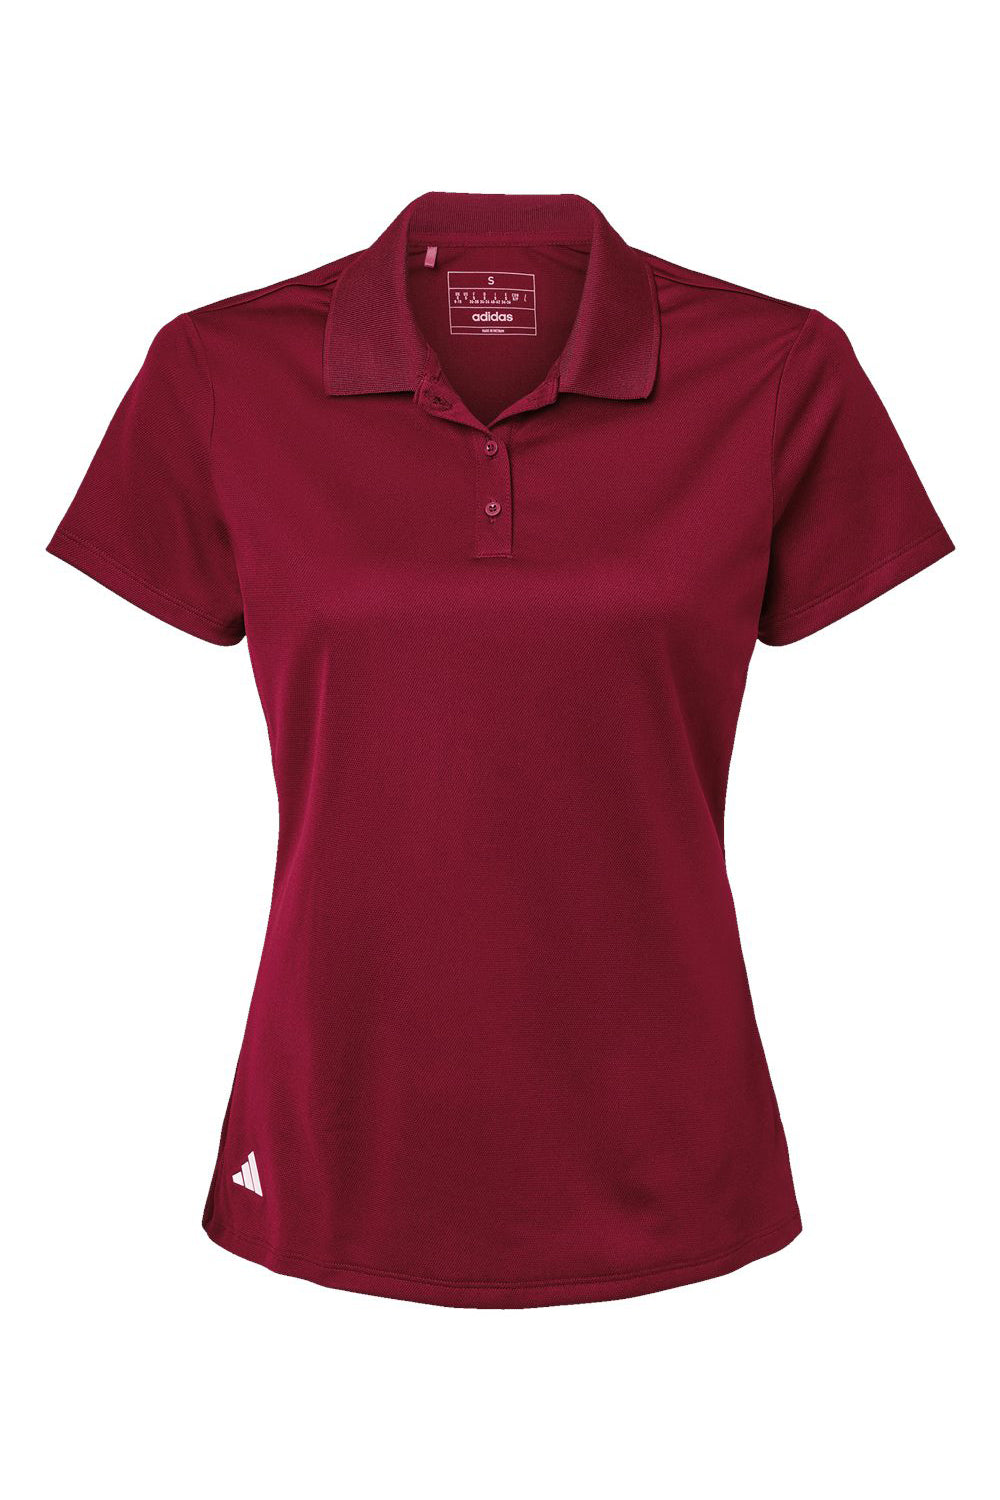 Adidas A431 Womens UV Protection Short Sleeve Polo Shirt Collegiate Burgundy Flat Front